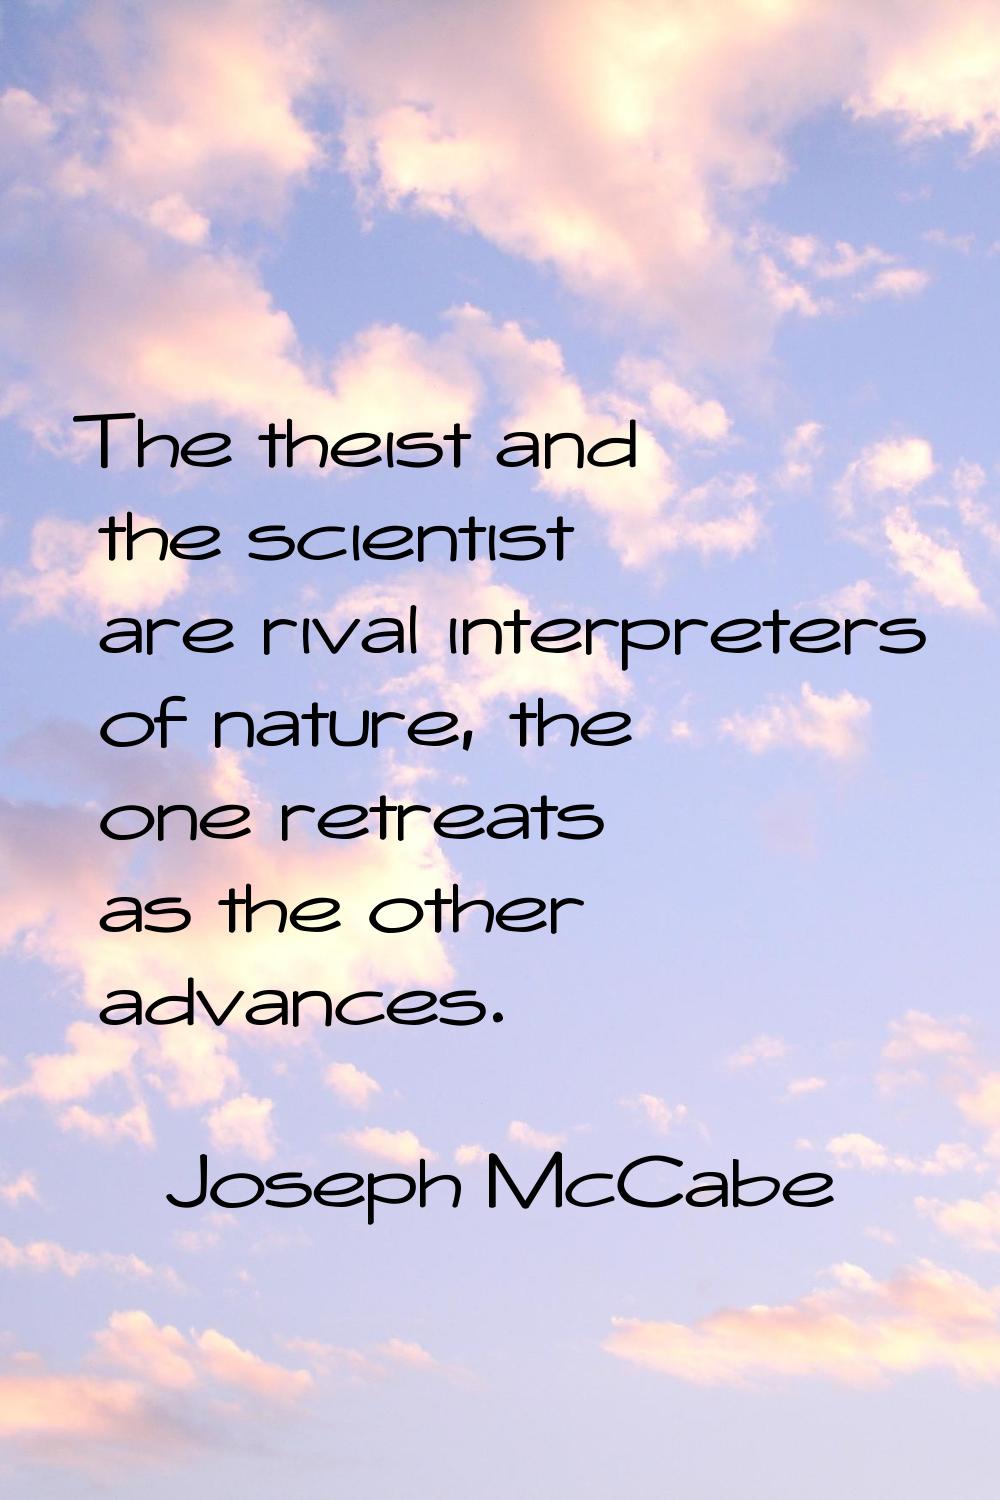 The theist and the scientist are rival interpreters of nature, the one retreats as the other advanc